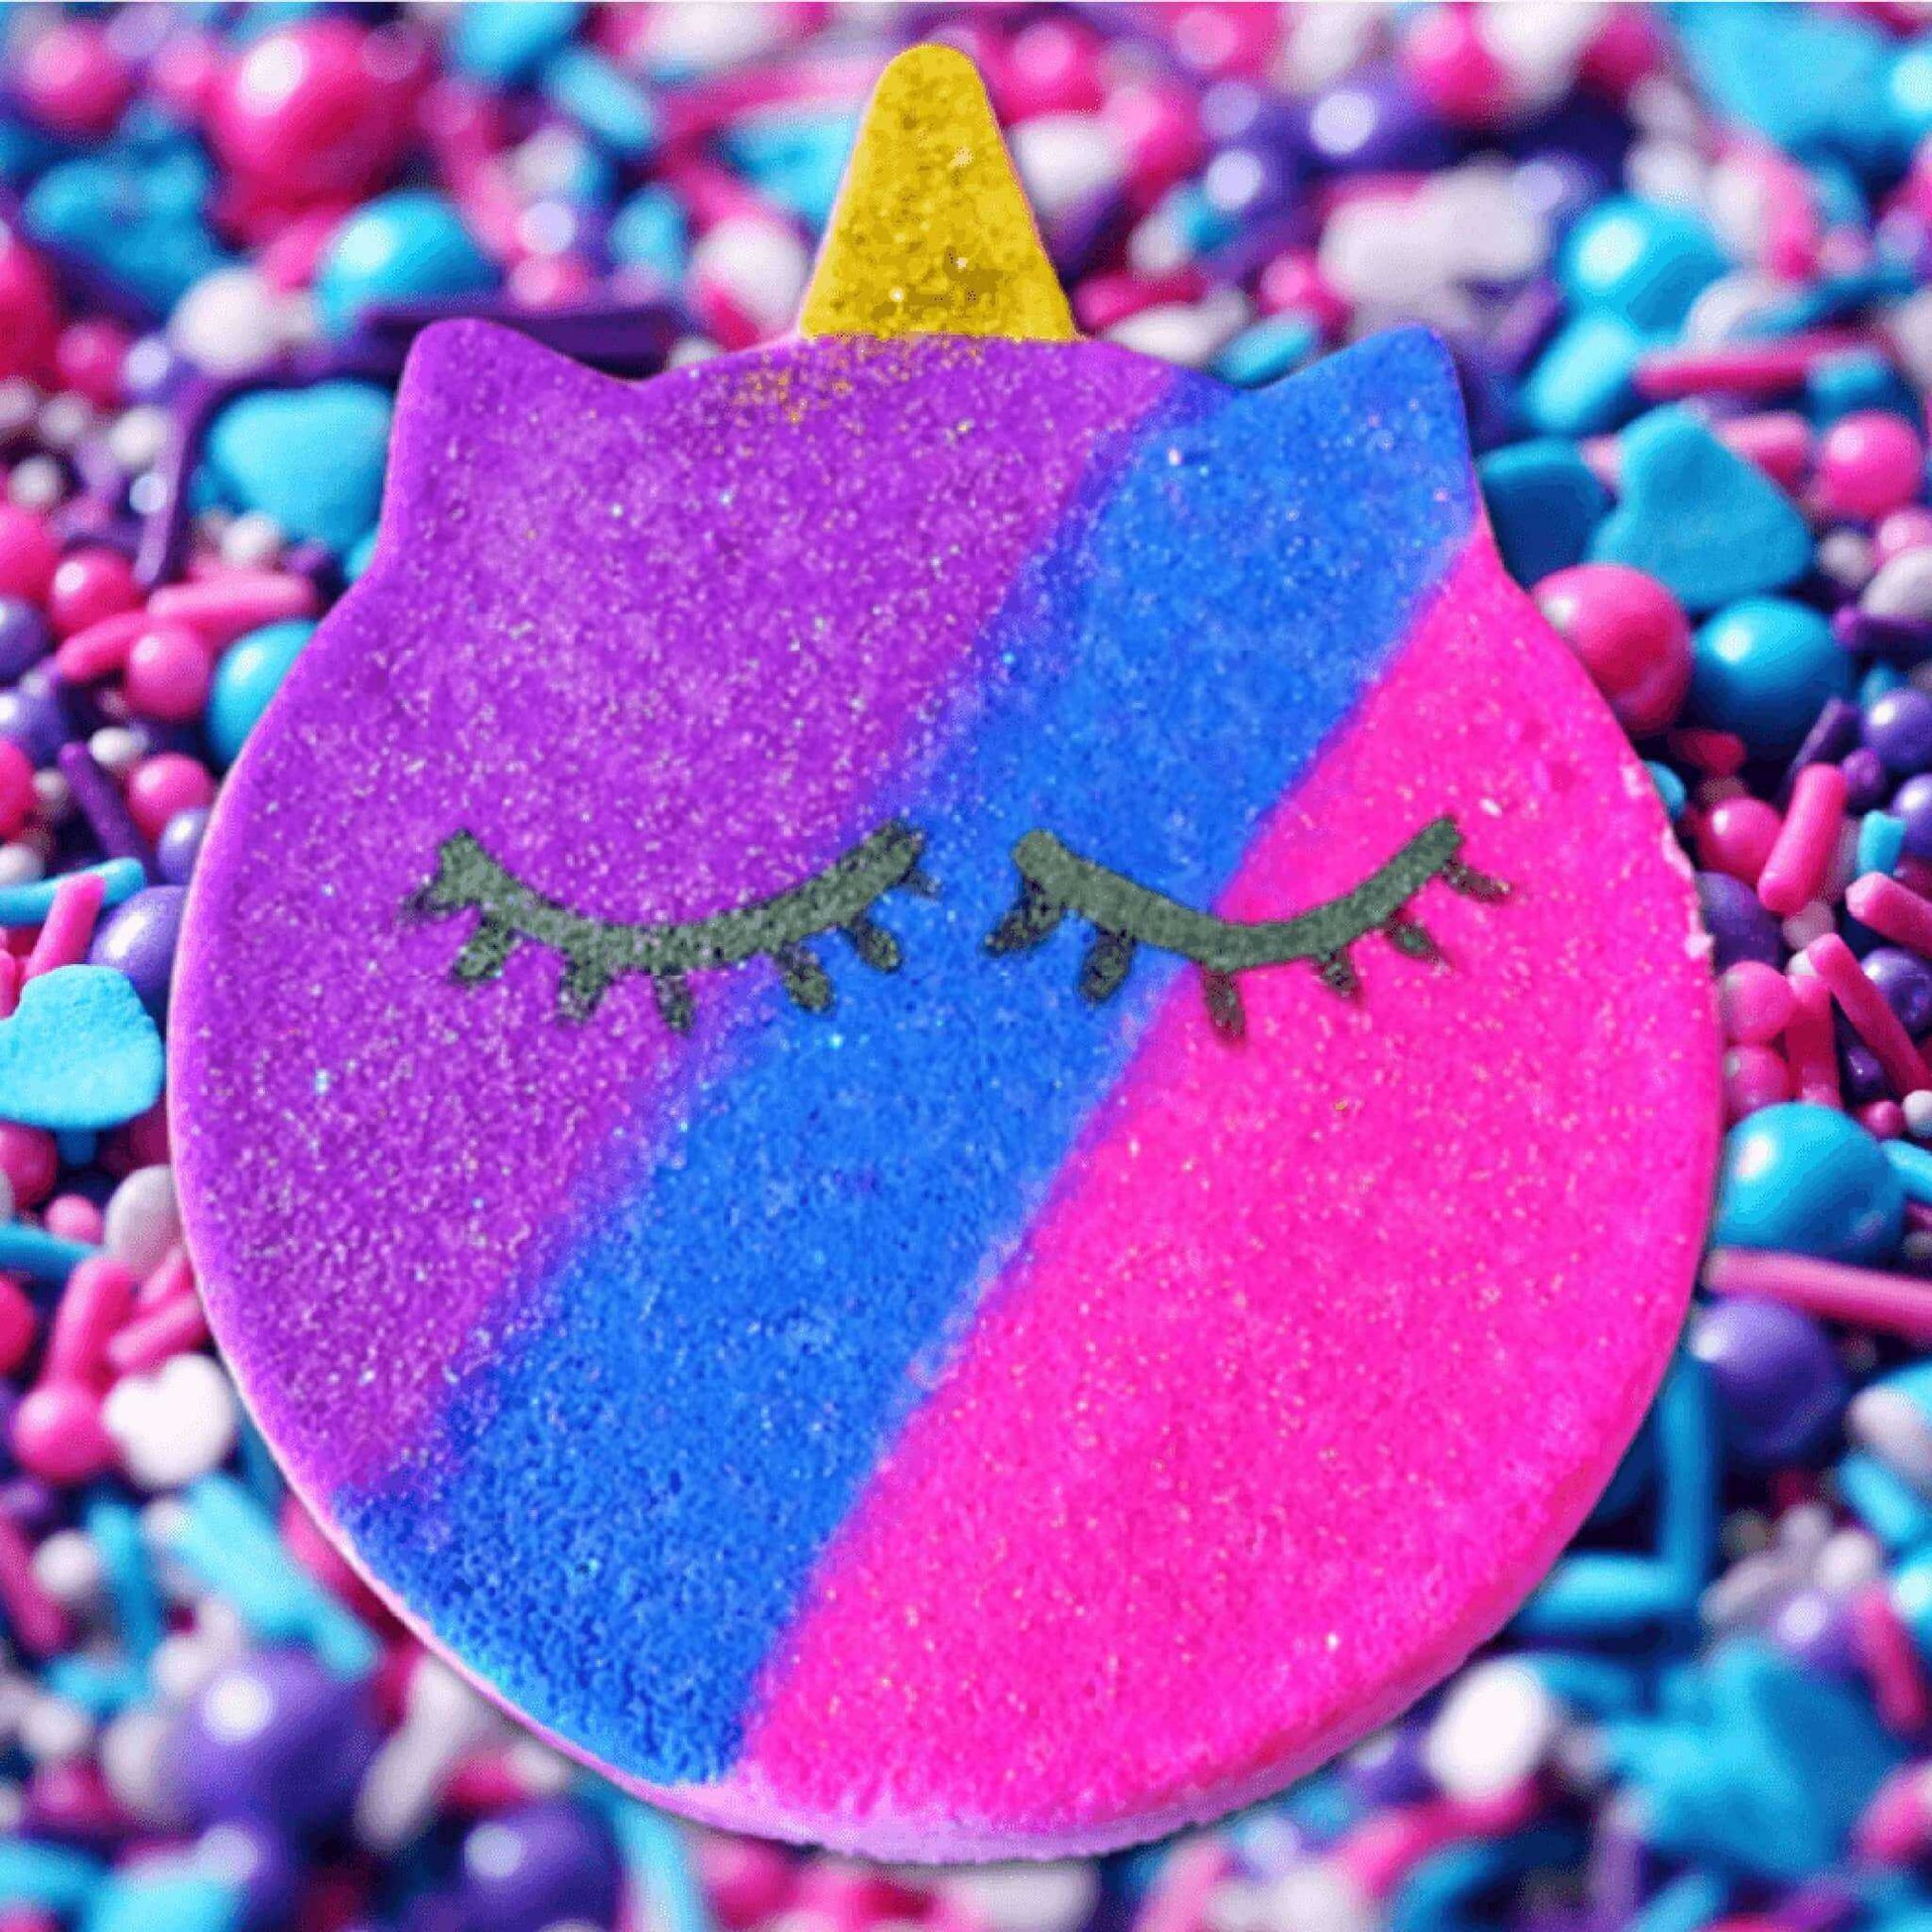 Indulge in enchanting relaxation with the Mystery Unicorn Fizzy Bath Bomb. Your magical bath time escape is here!